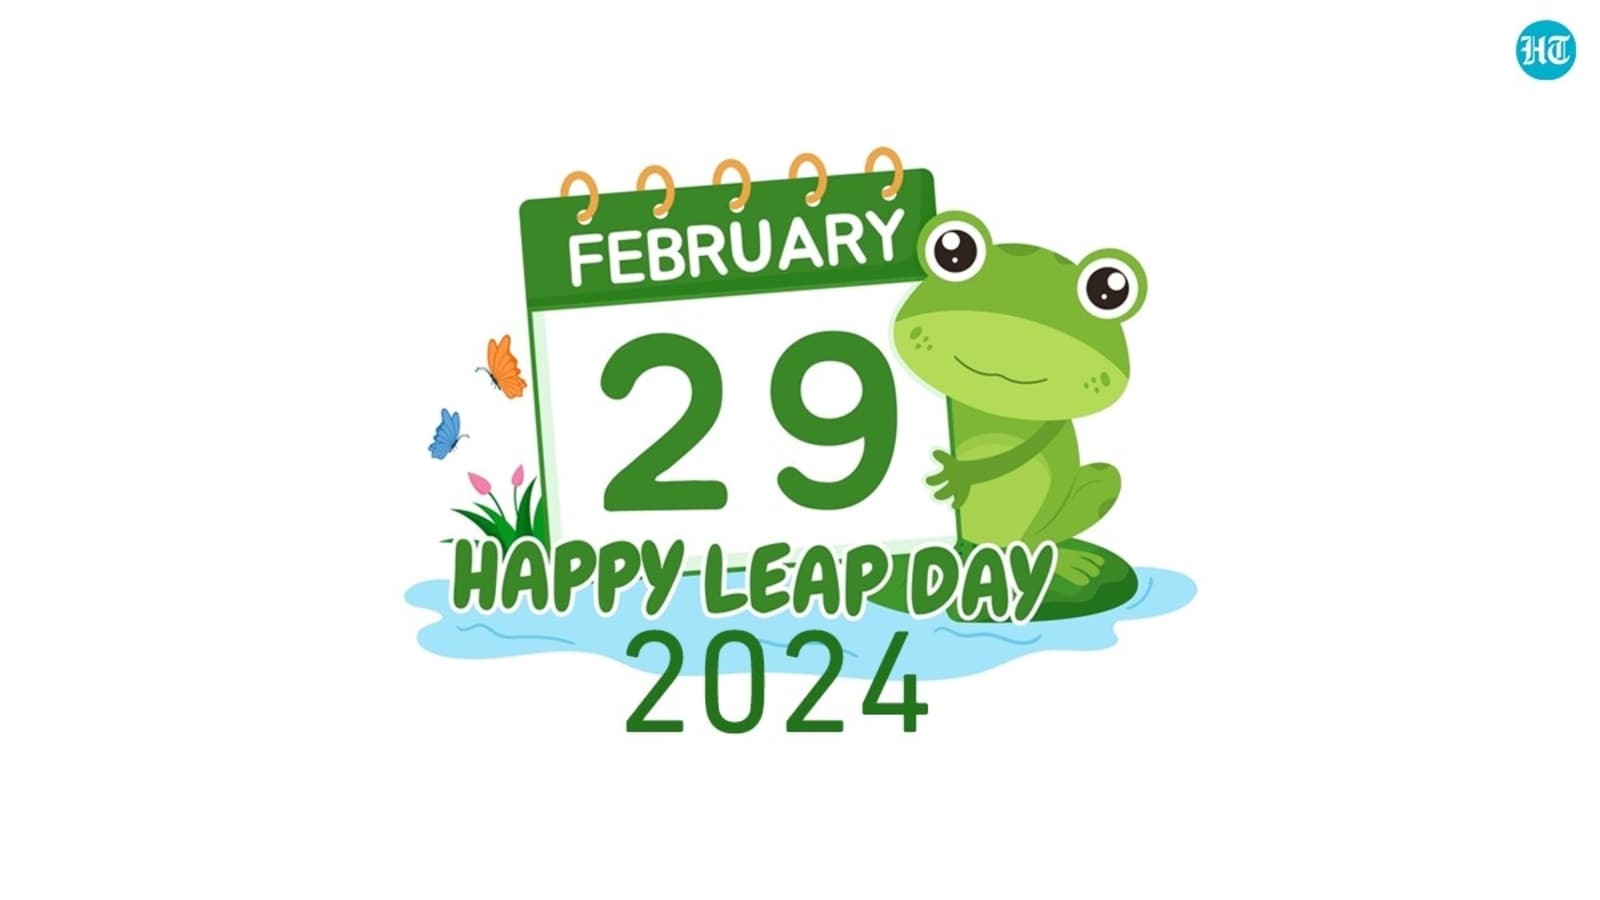 Happy Leap Day 2024: Wishes, images, quotes, SMS, greetings, WhatsApp and Facebook status to share on February 29